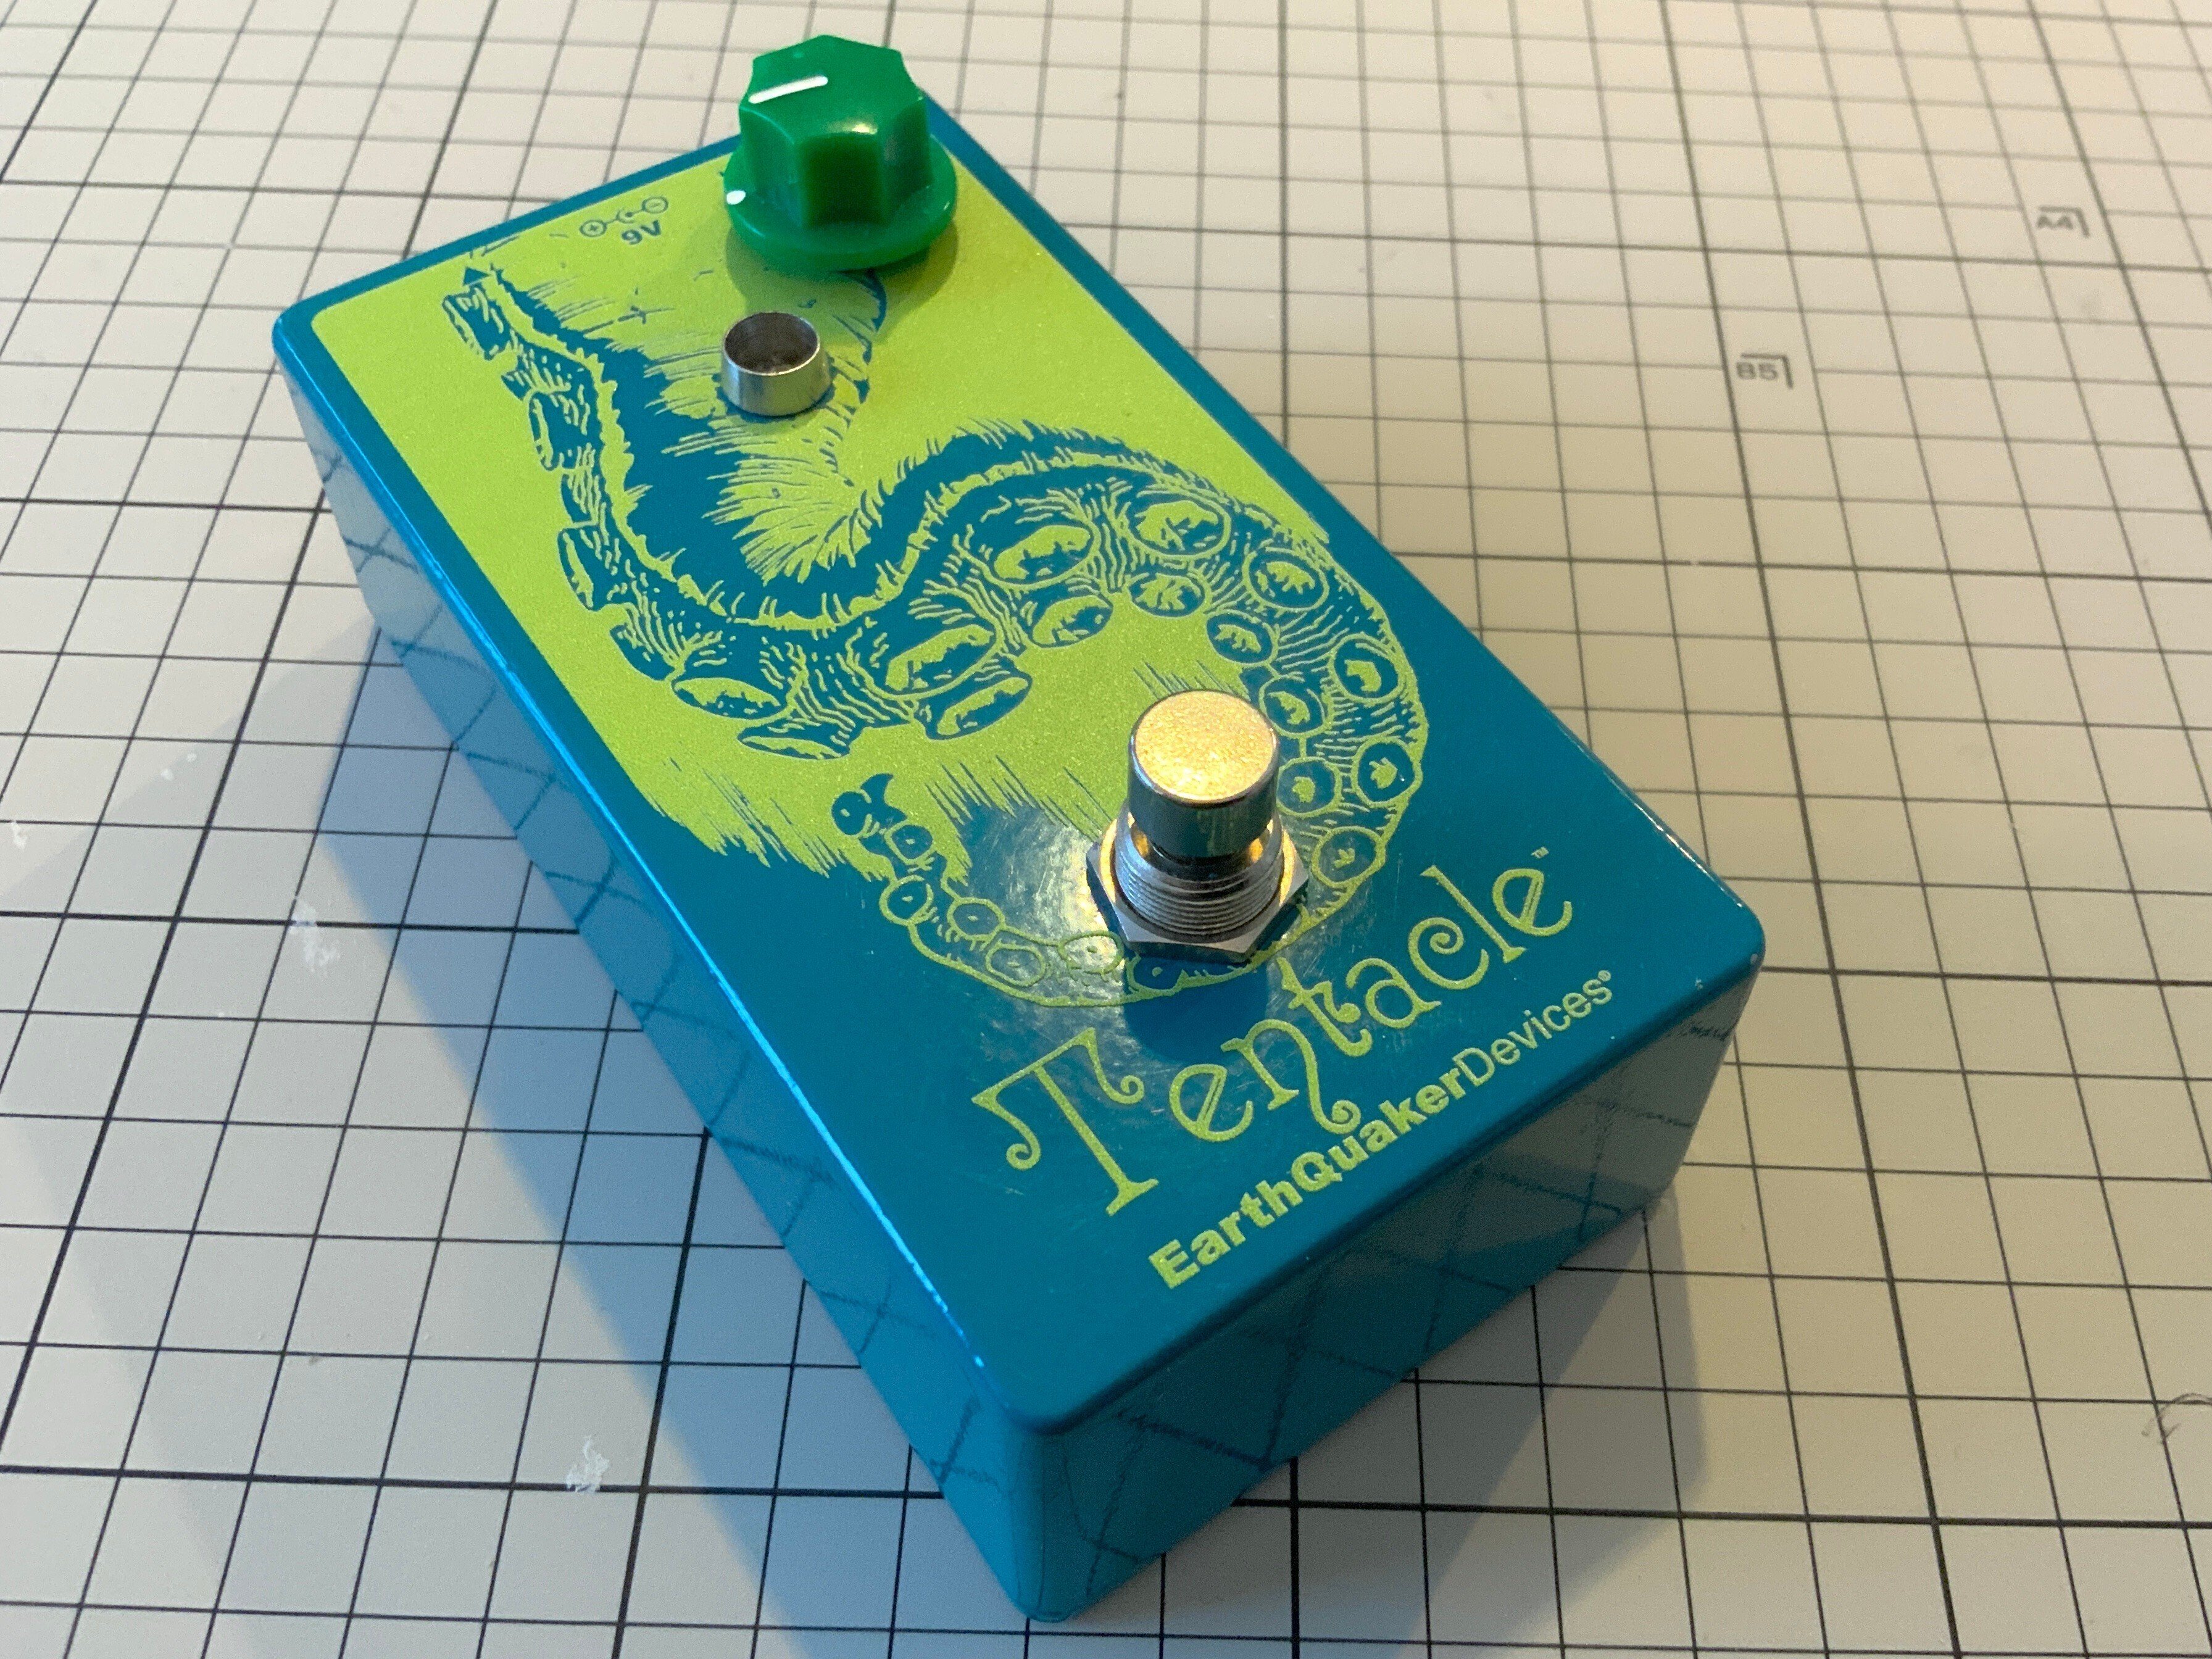 Earth Quaker Devices アナログオクターブアップ Tentacle ギター